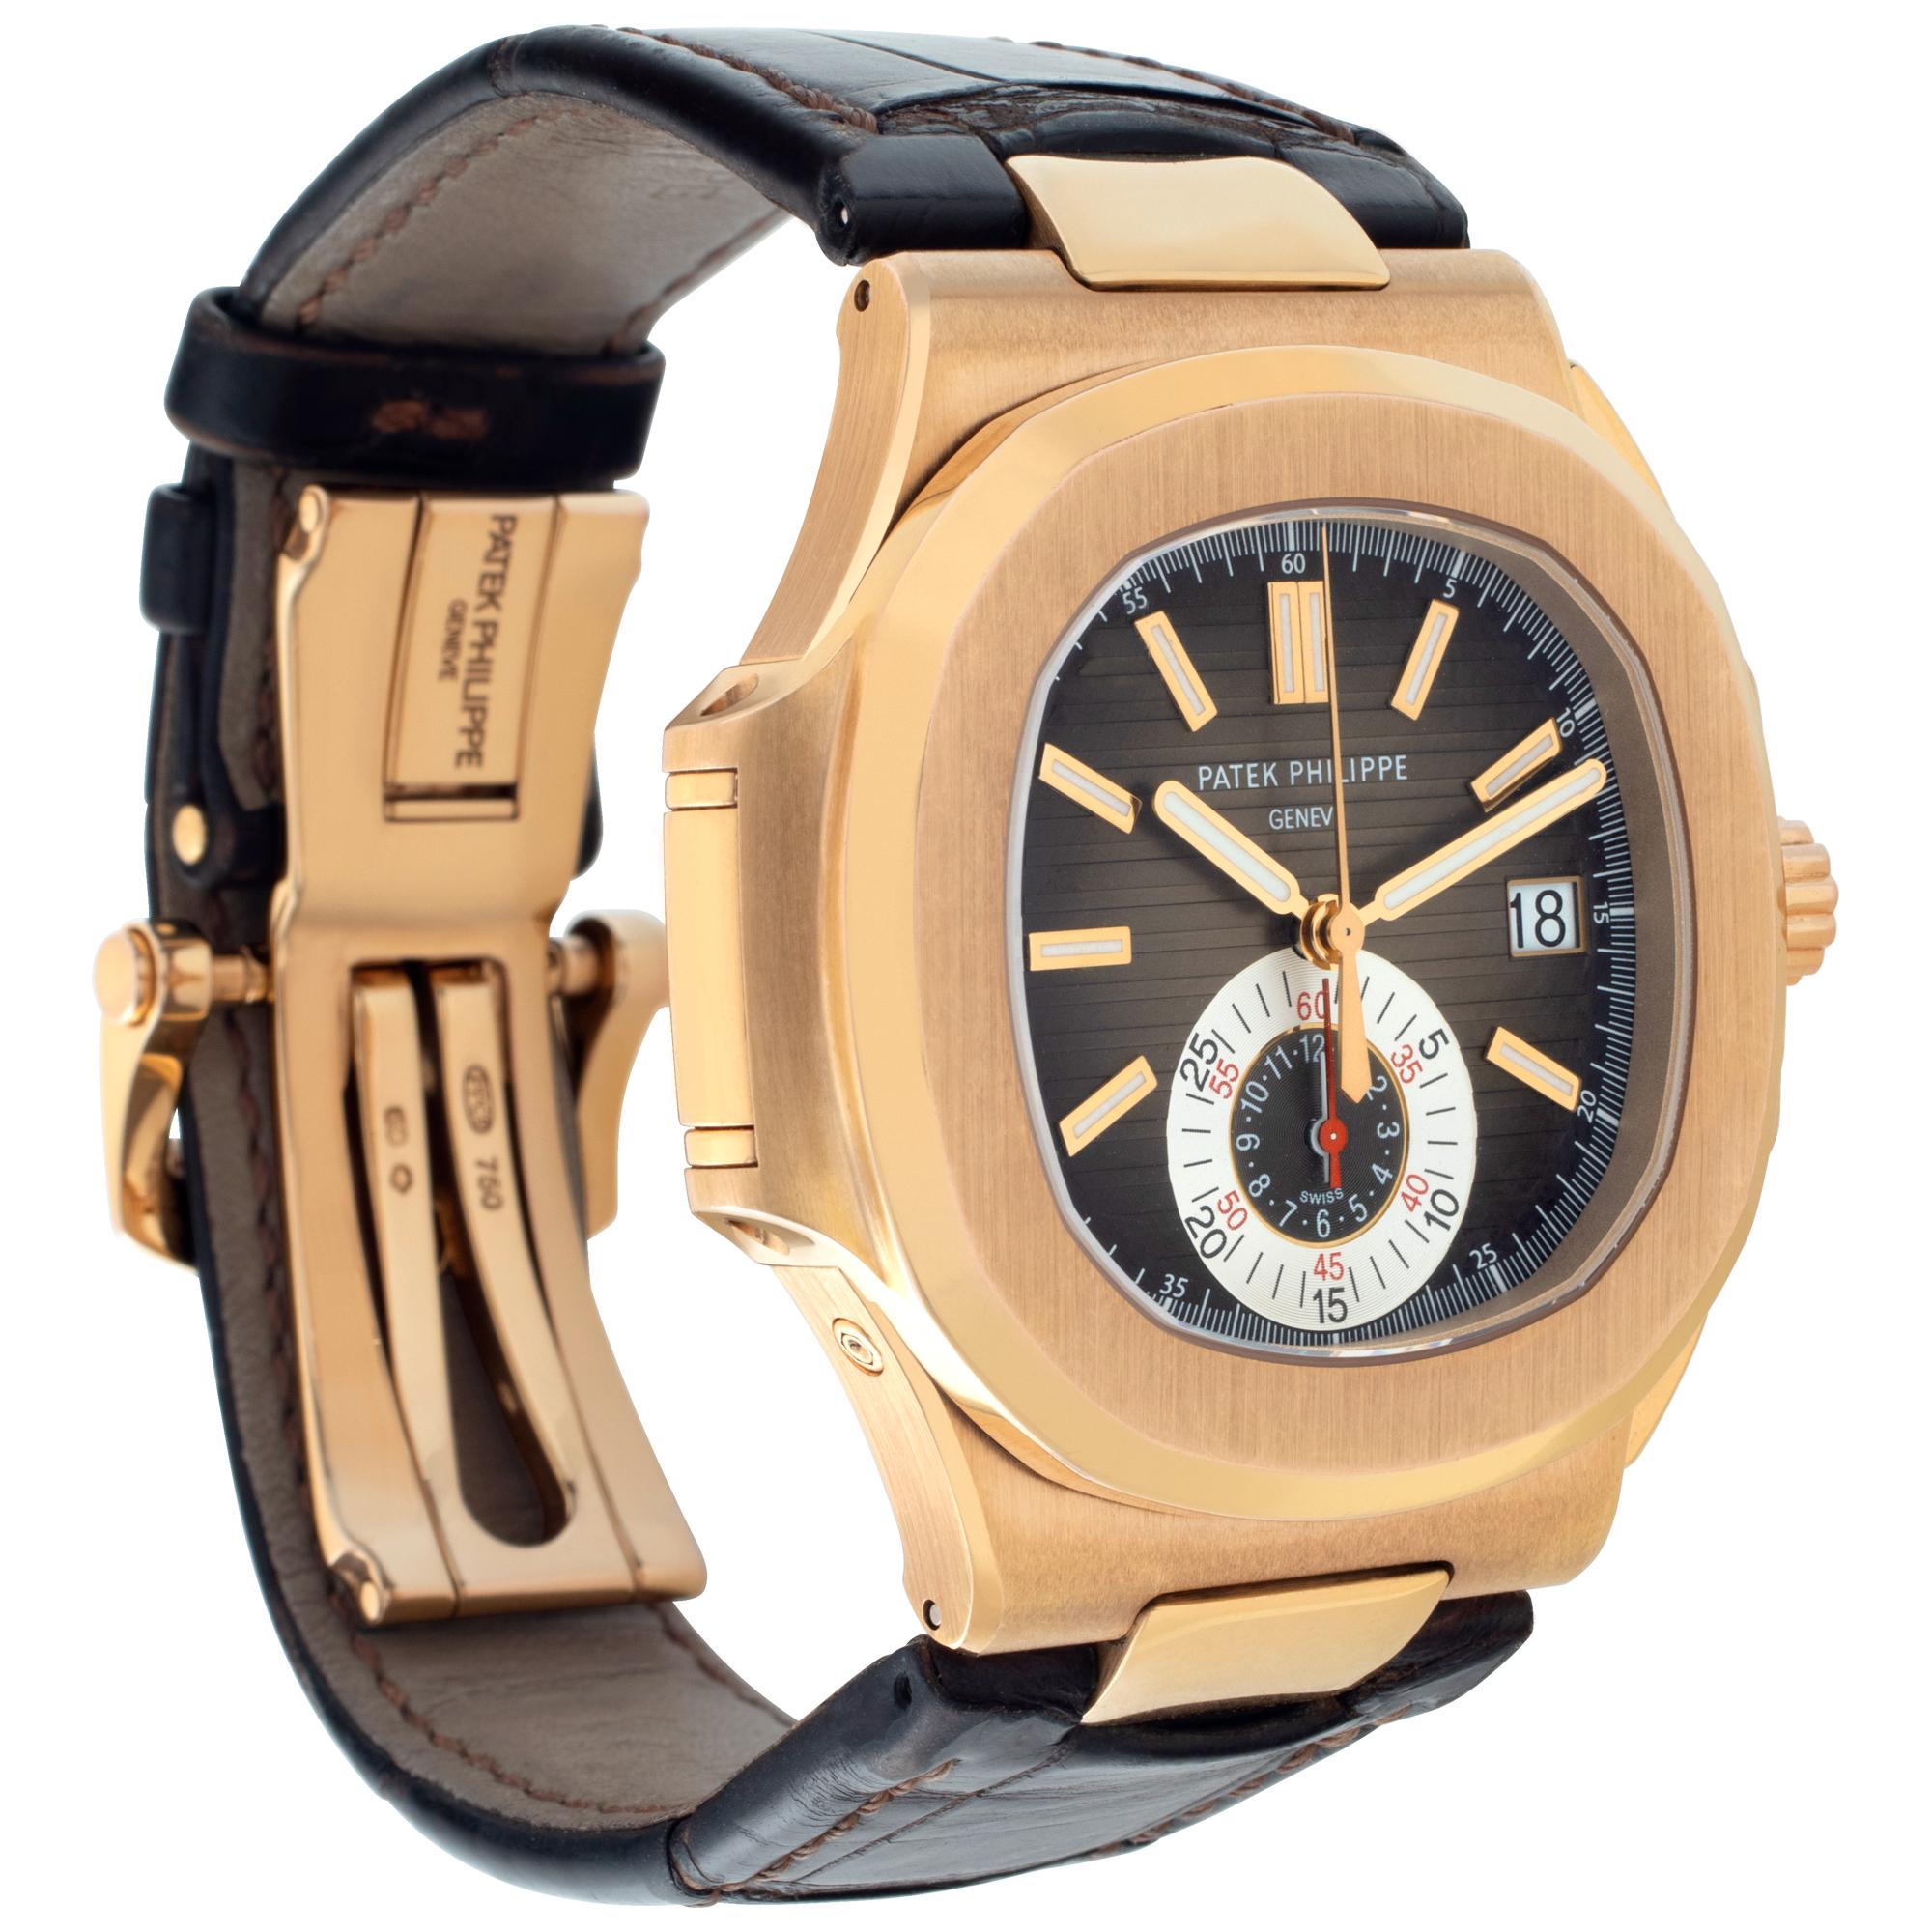 Patek Philippe Nautilus 5980r-001 in rose gold 38.5mm auto watch In Excellent Condition For Sale In Surfside, FL